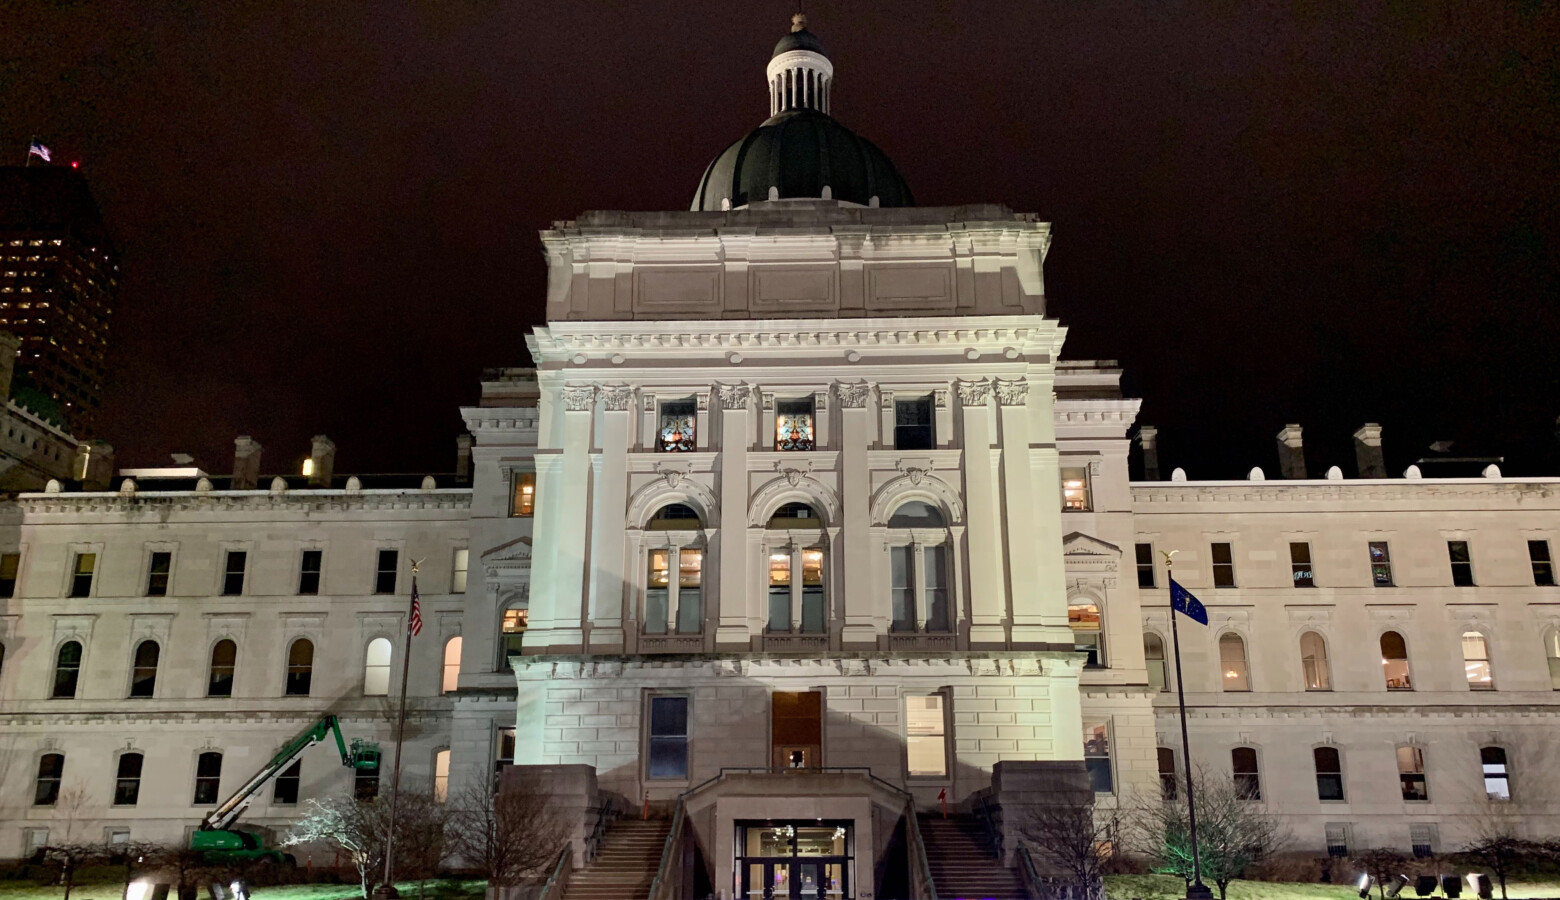 Tensions flared in the Indiana House after Republicans shouted down Democratic lawmakers who aired concerns about discrimination. (Brandon Smith/IPB News)